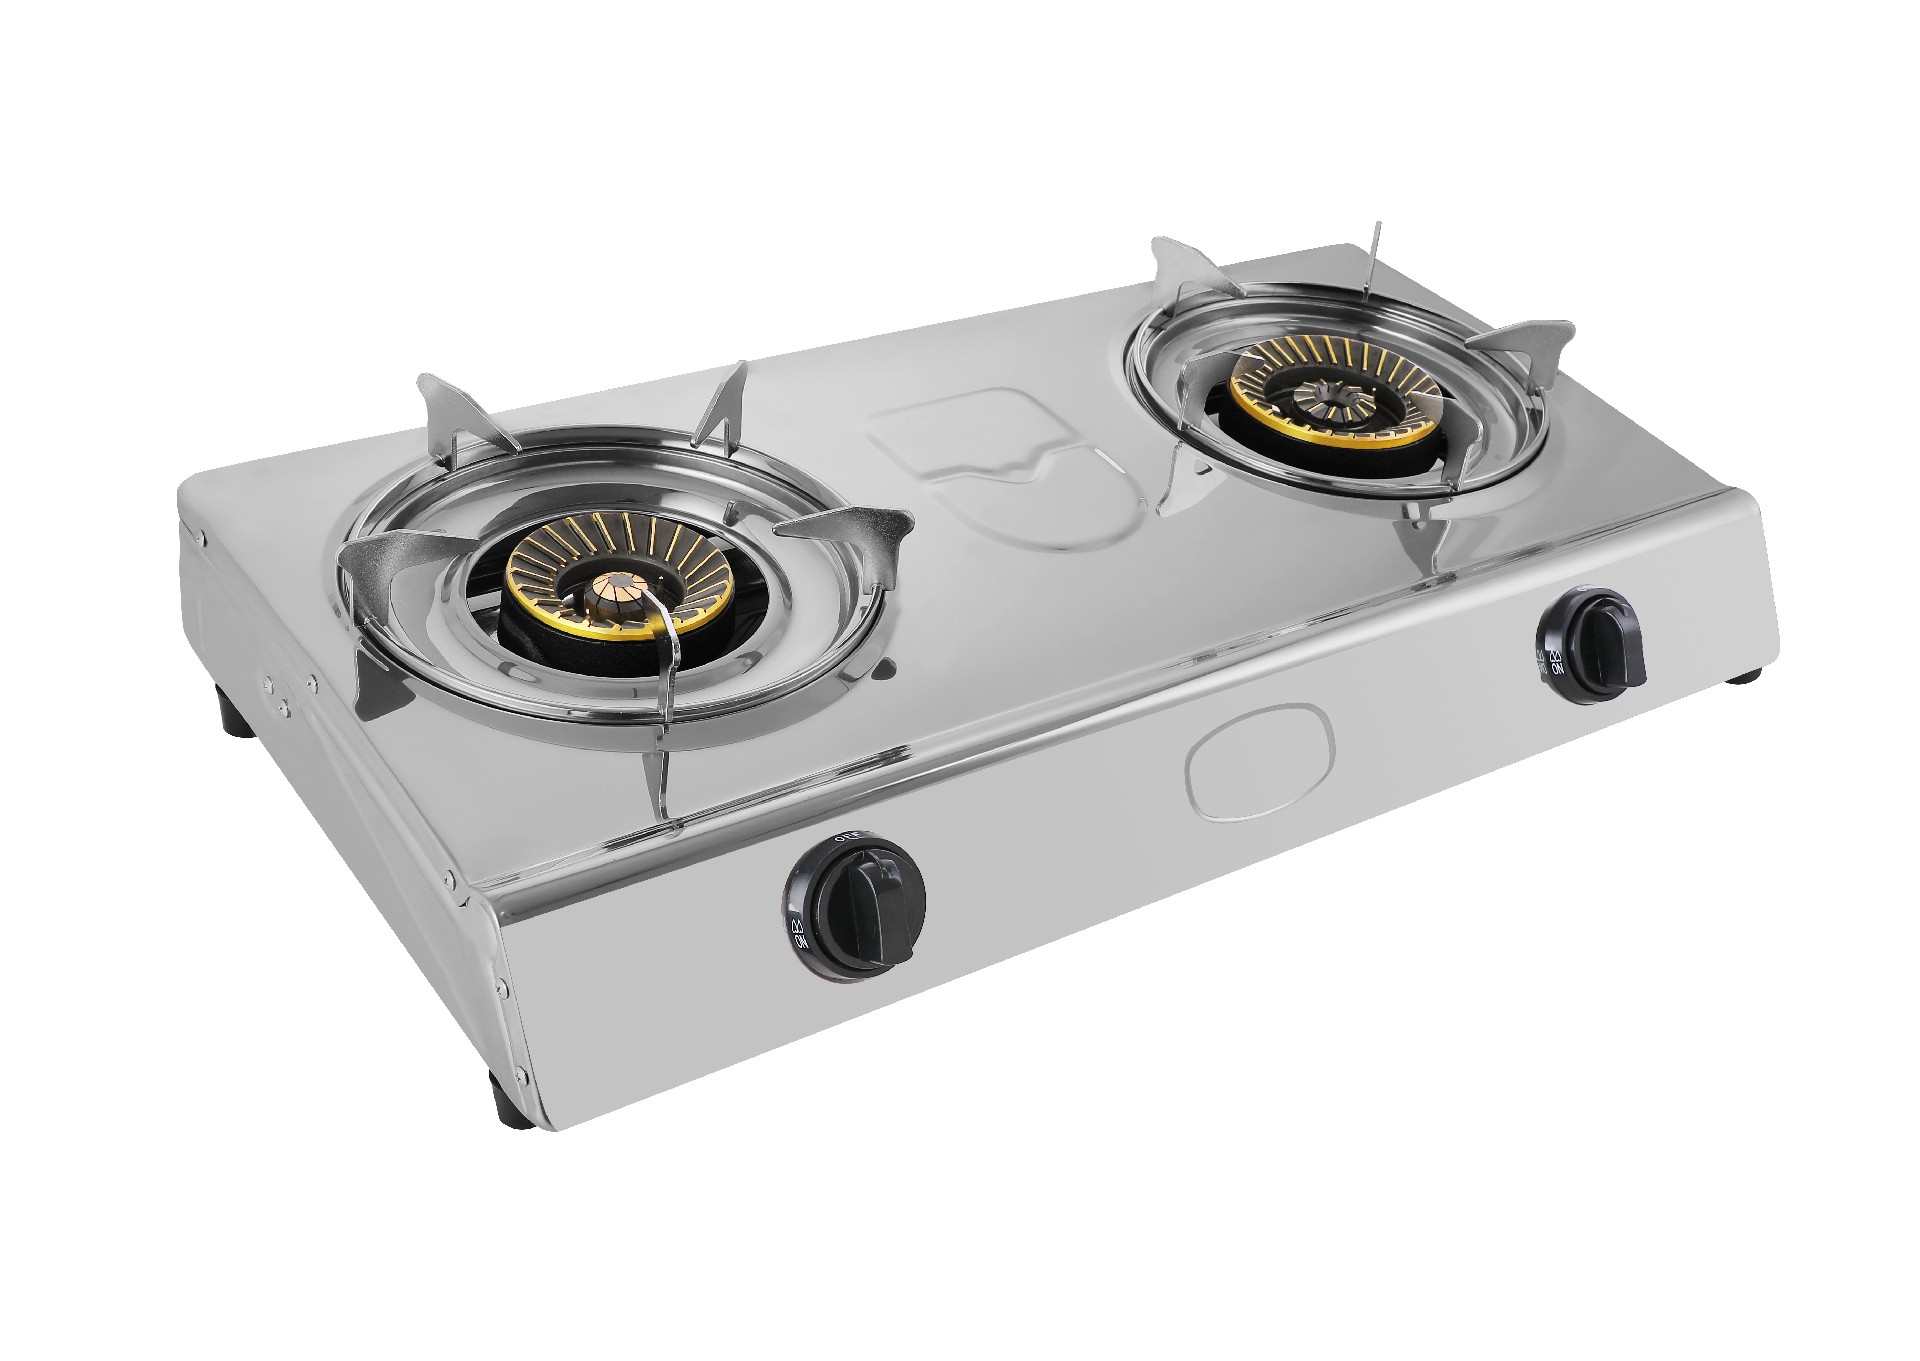 GAS STOVE 2 BURNERS (with Safety Device)